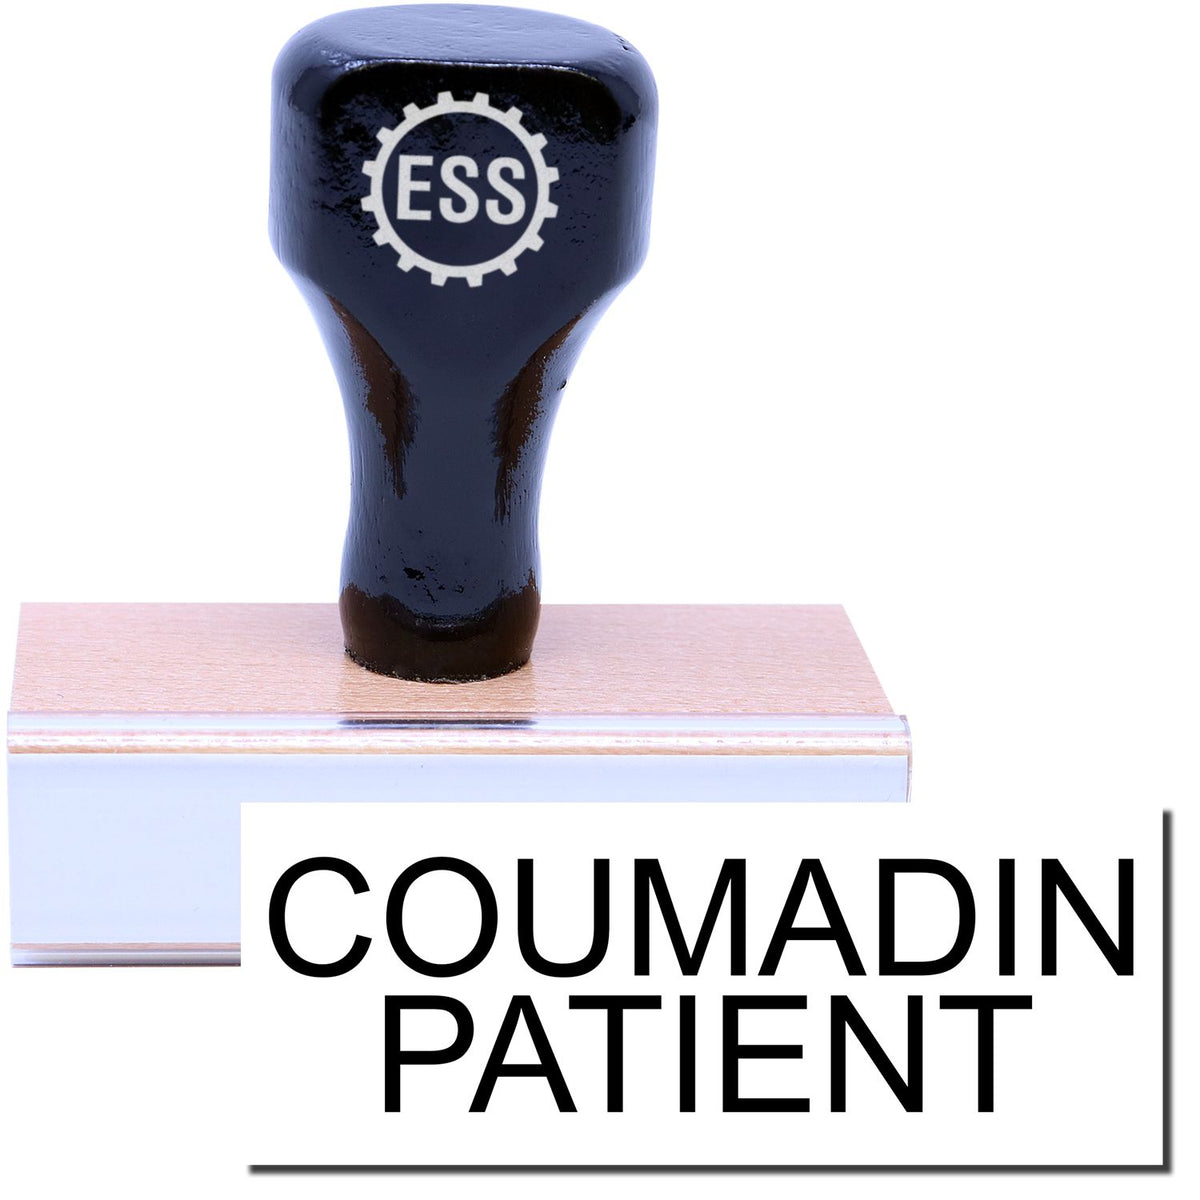 A stock office rubber stamp with a stamped image showing how the text &quot;COUMADIN PATIENT&quot; in a large font is displayed after stamping.